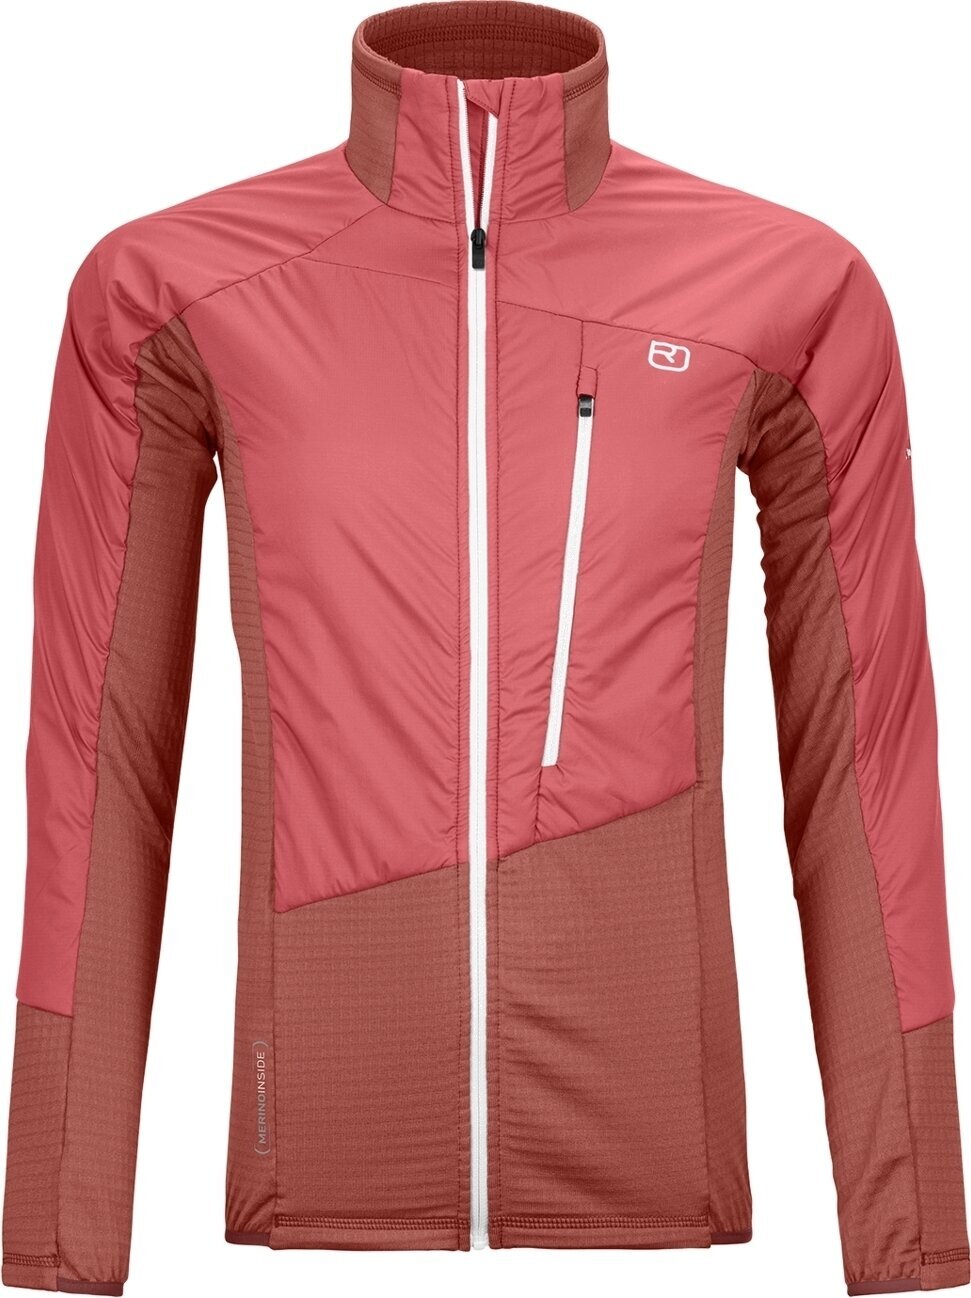 Giacca outdoor Ortovox Westalpen Swisswool Hybrid Jacket W Wild Rose S Giacca outdoor